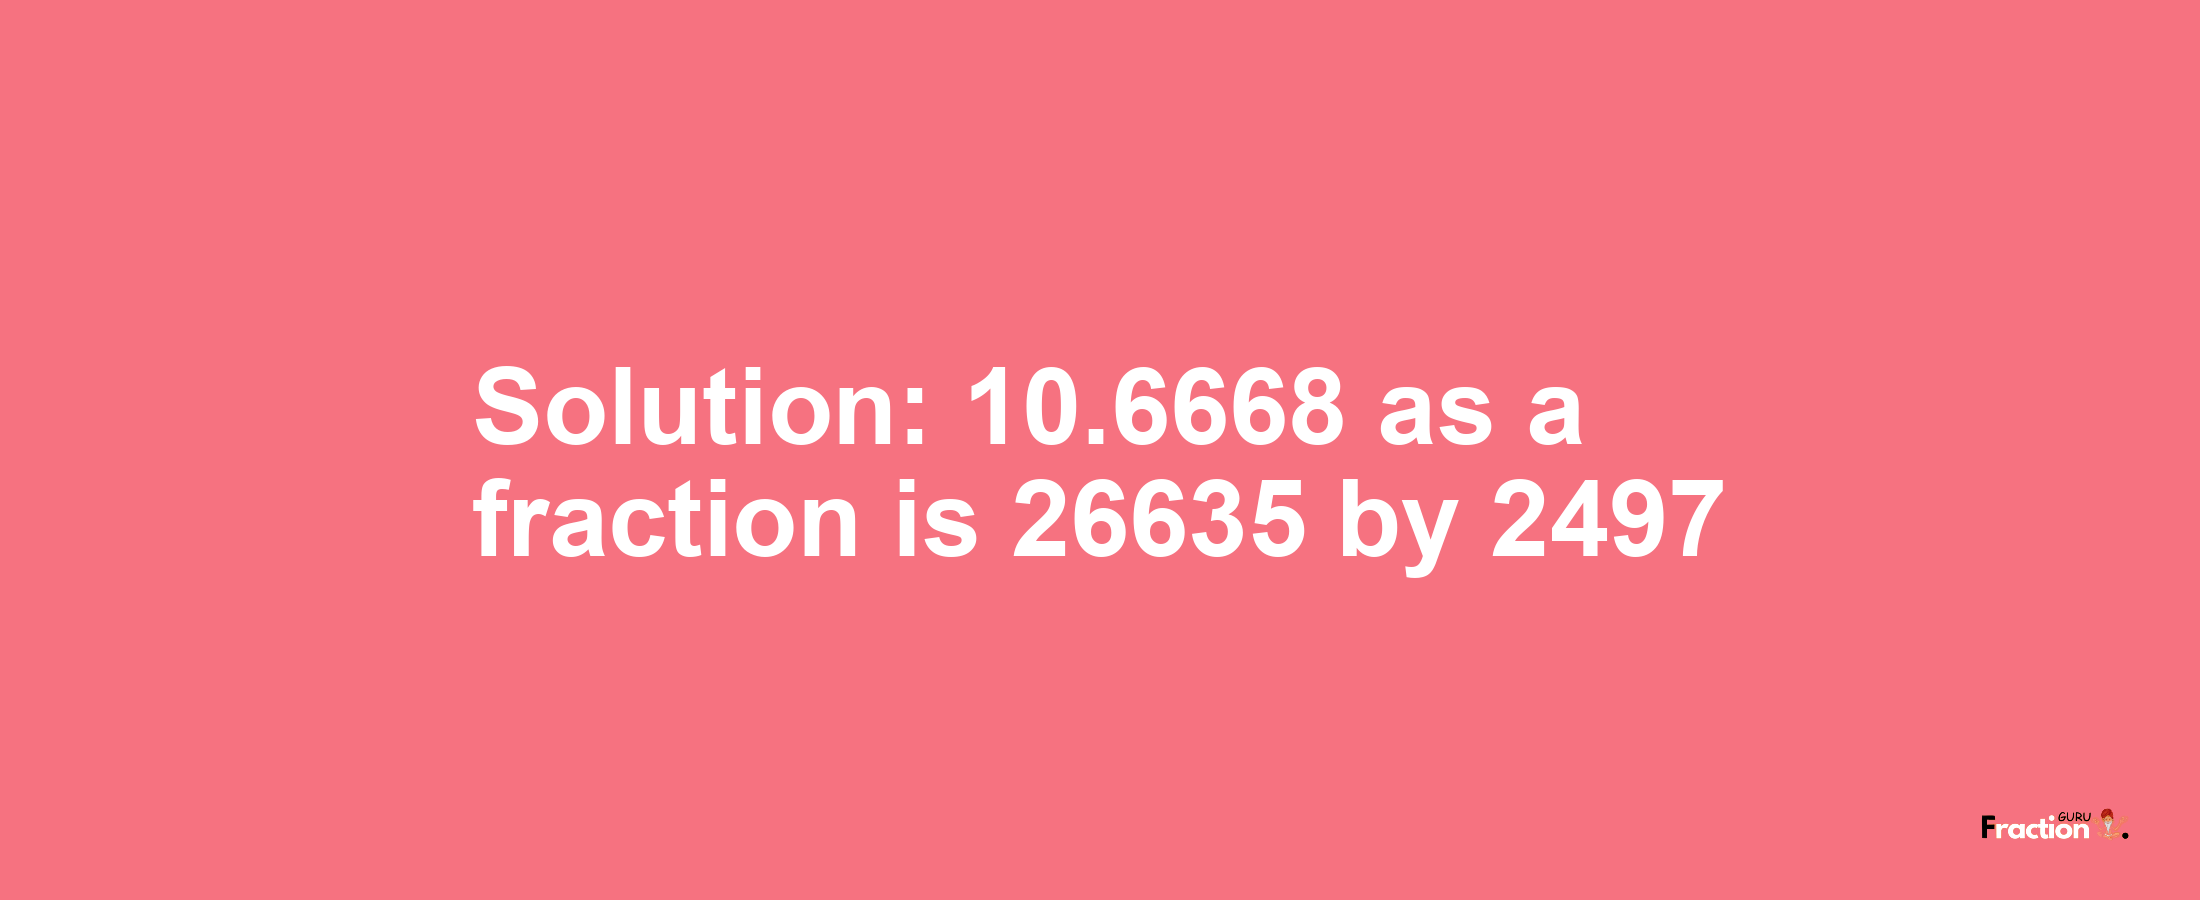 Solution:10.6668 as a fraction is 26635/2497